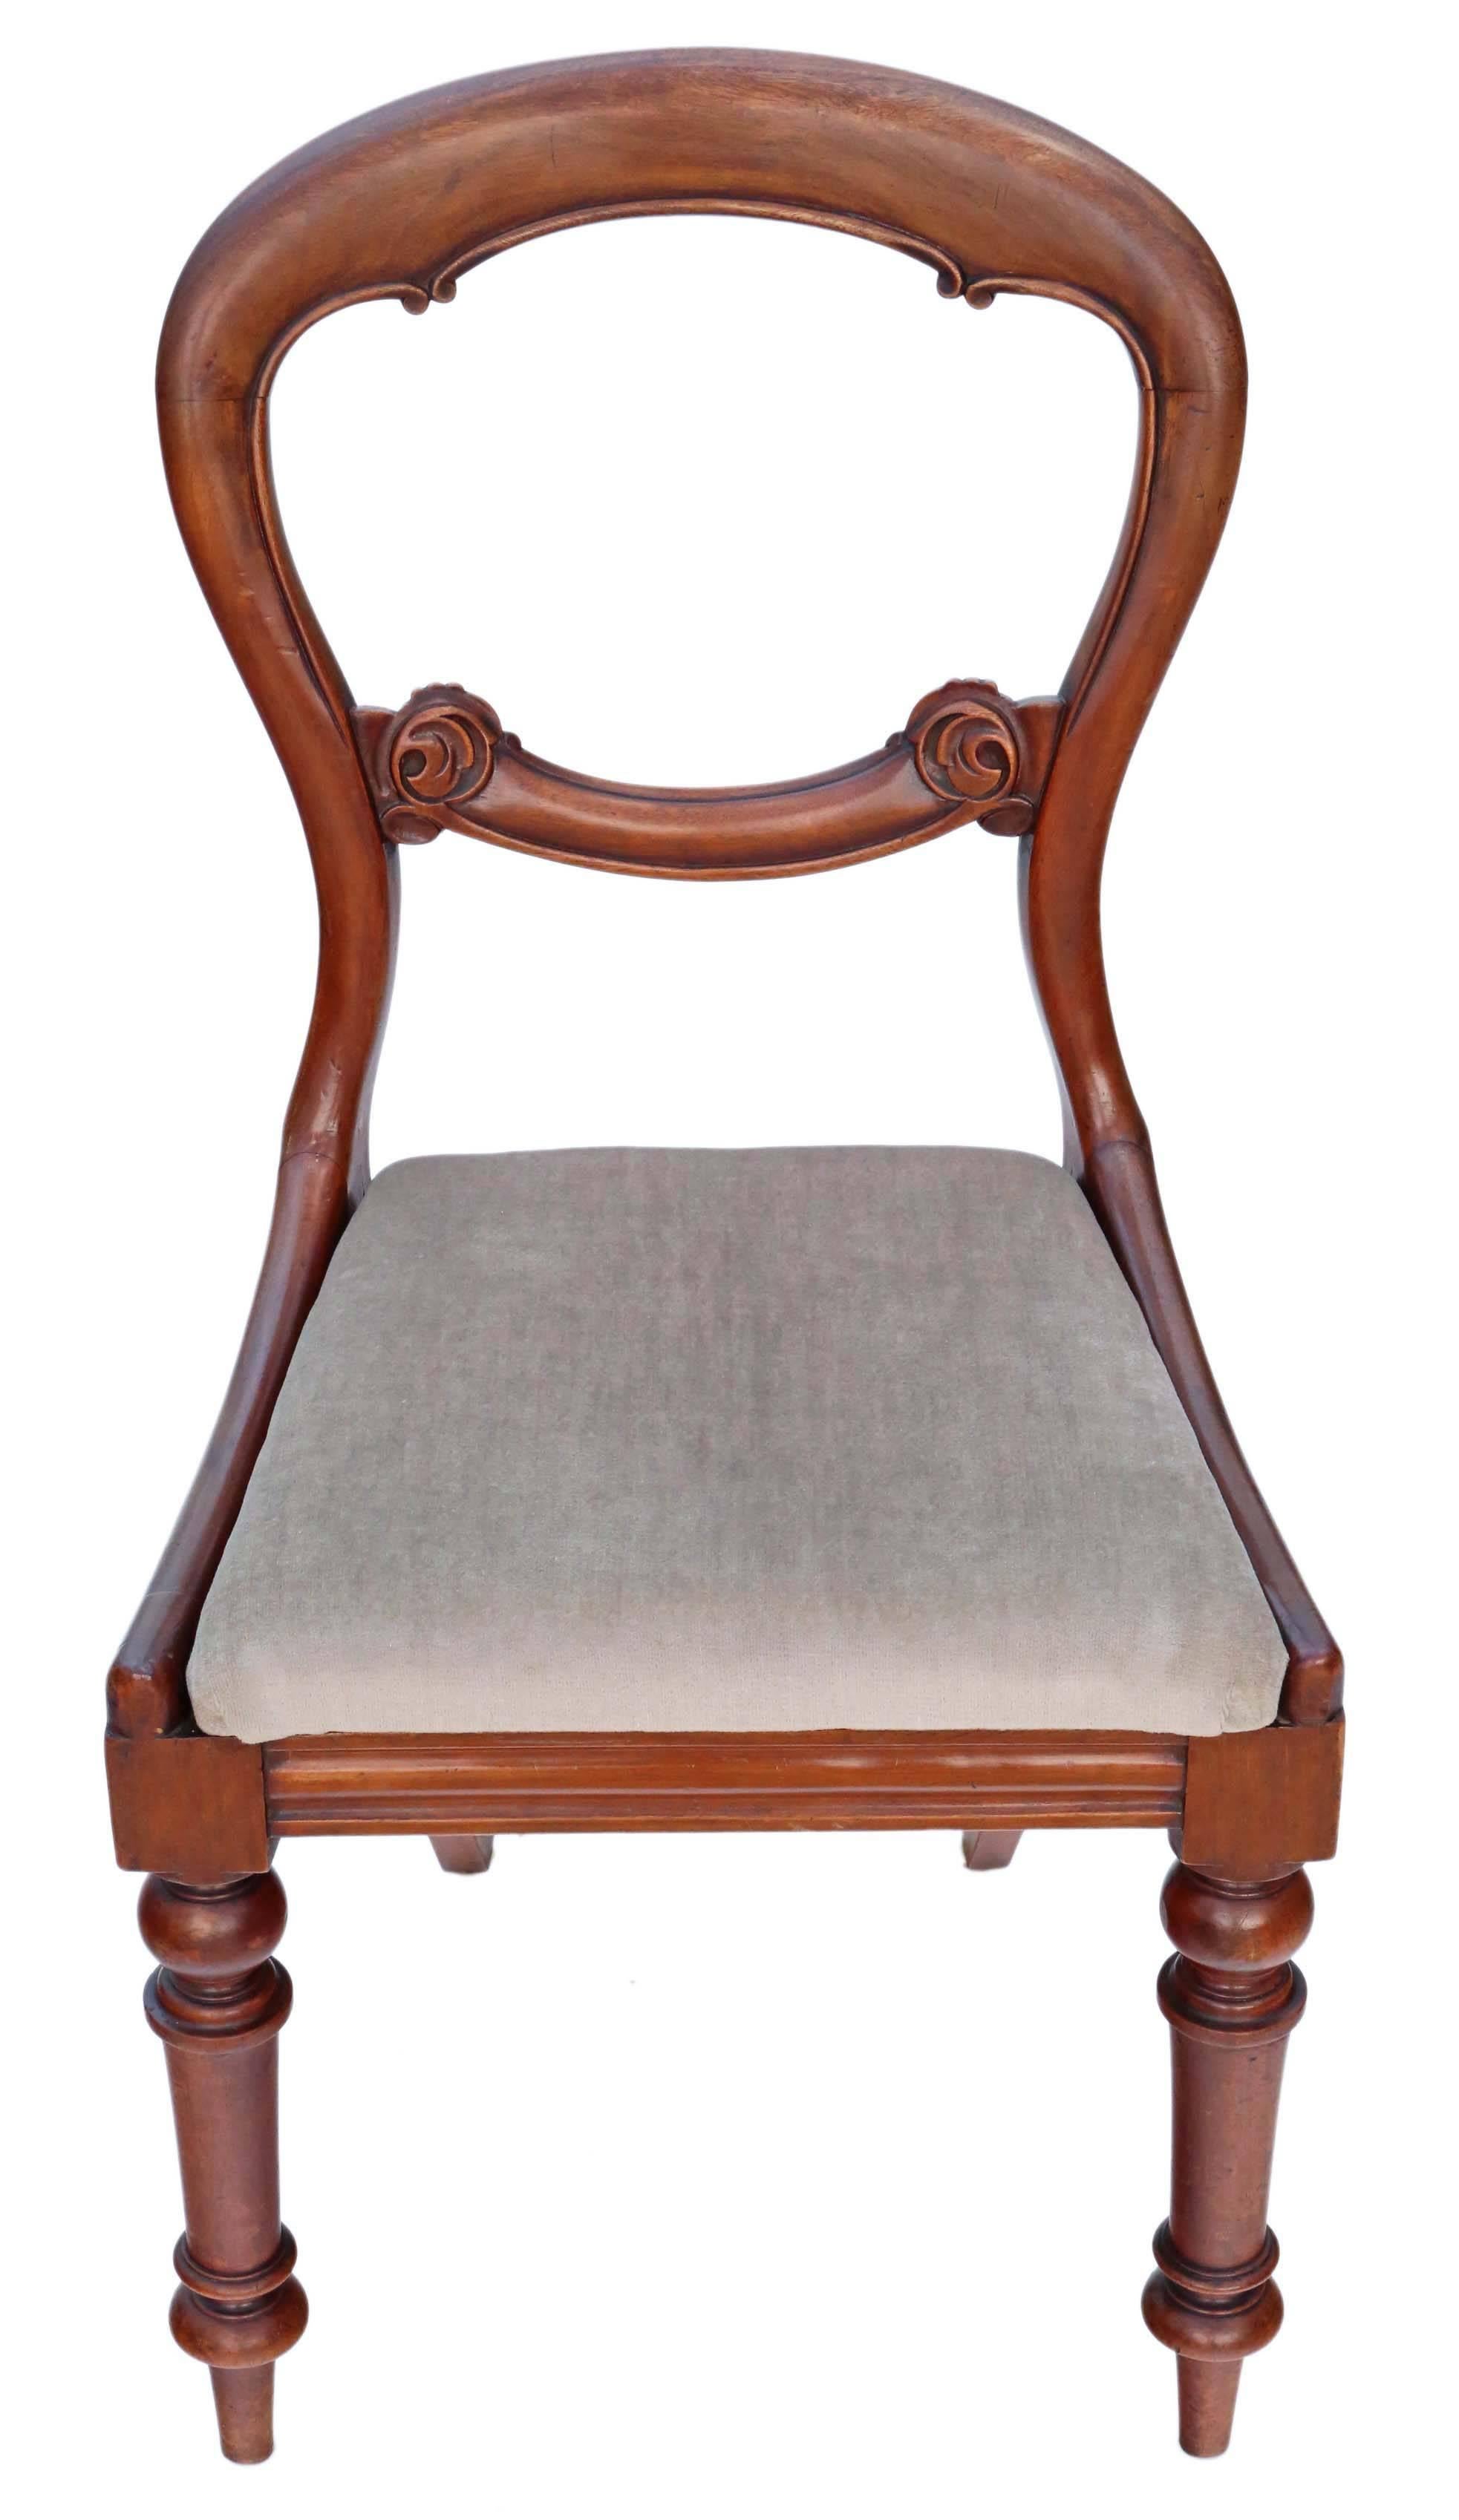 British Quality Set of Four Victorian circa 1850 Mahogany Balloon Back Dining Chairs For Sale